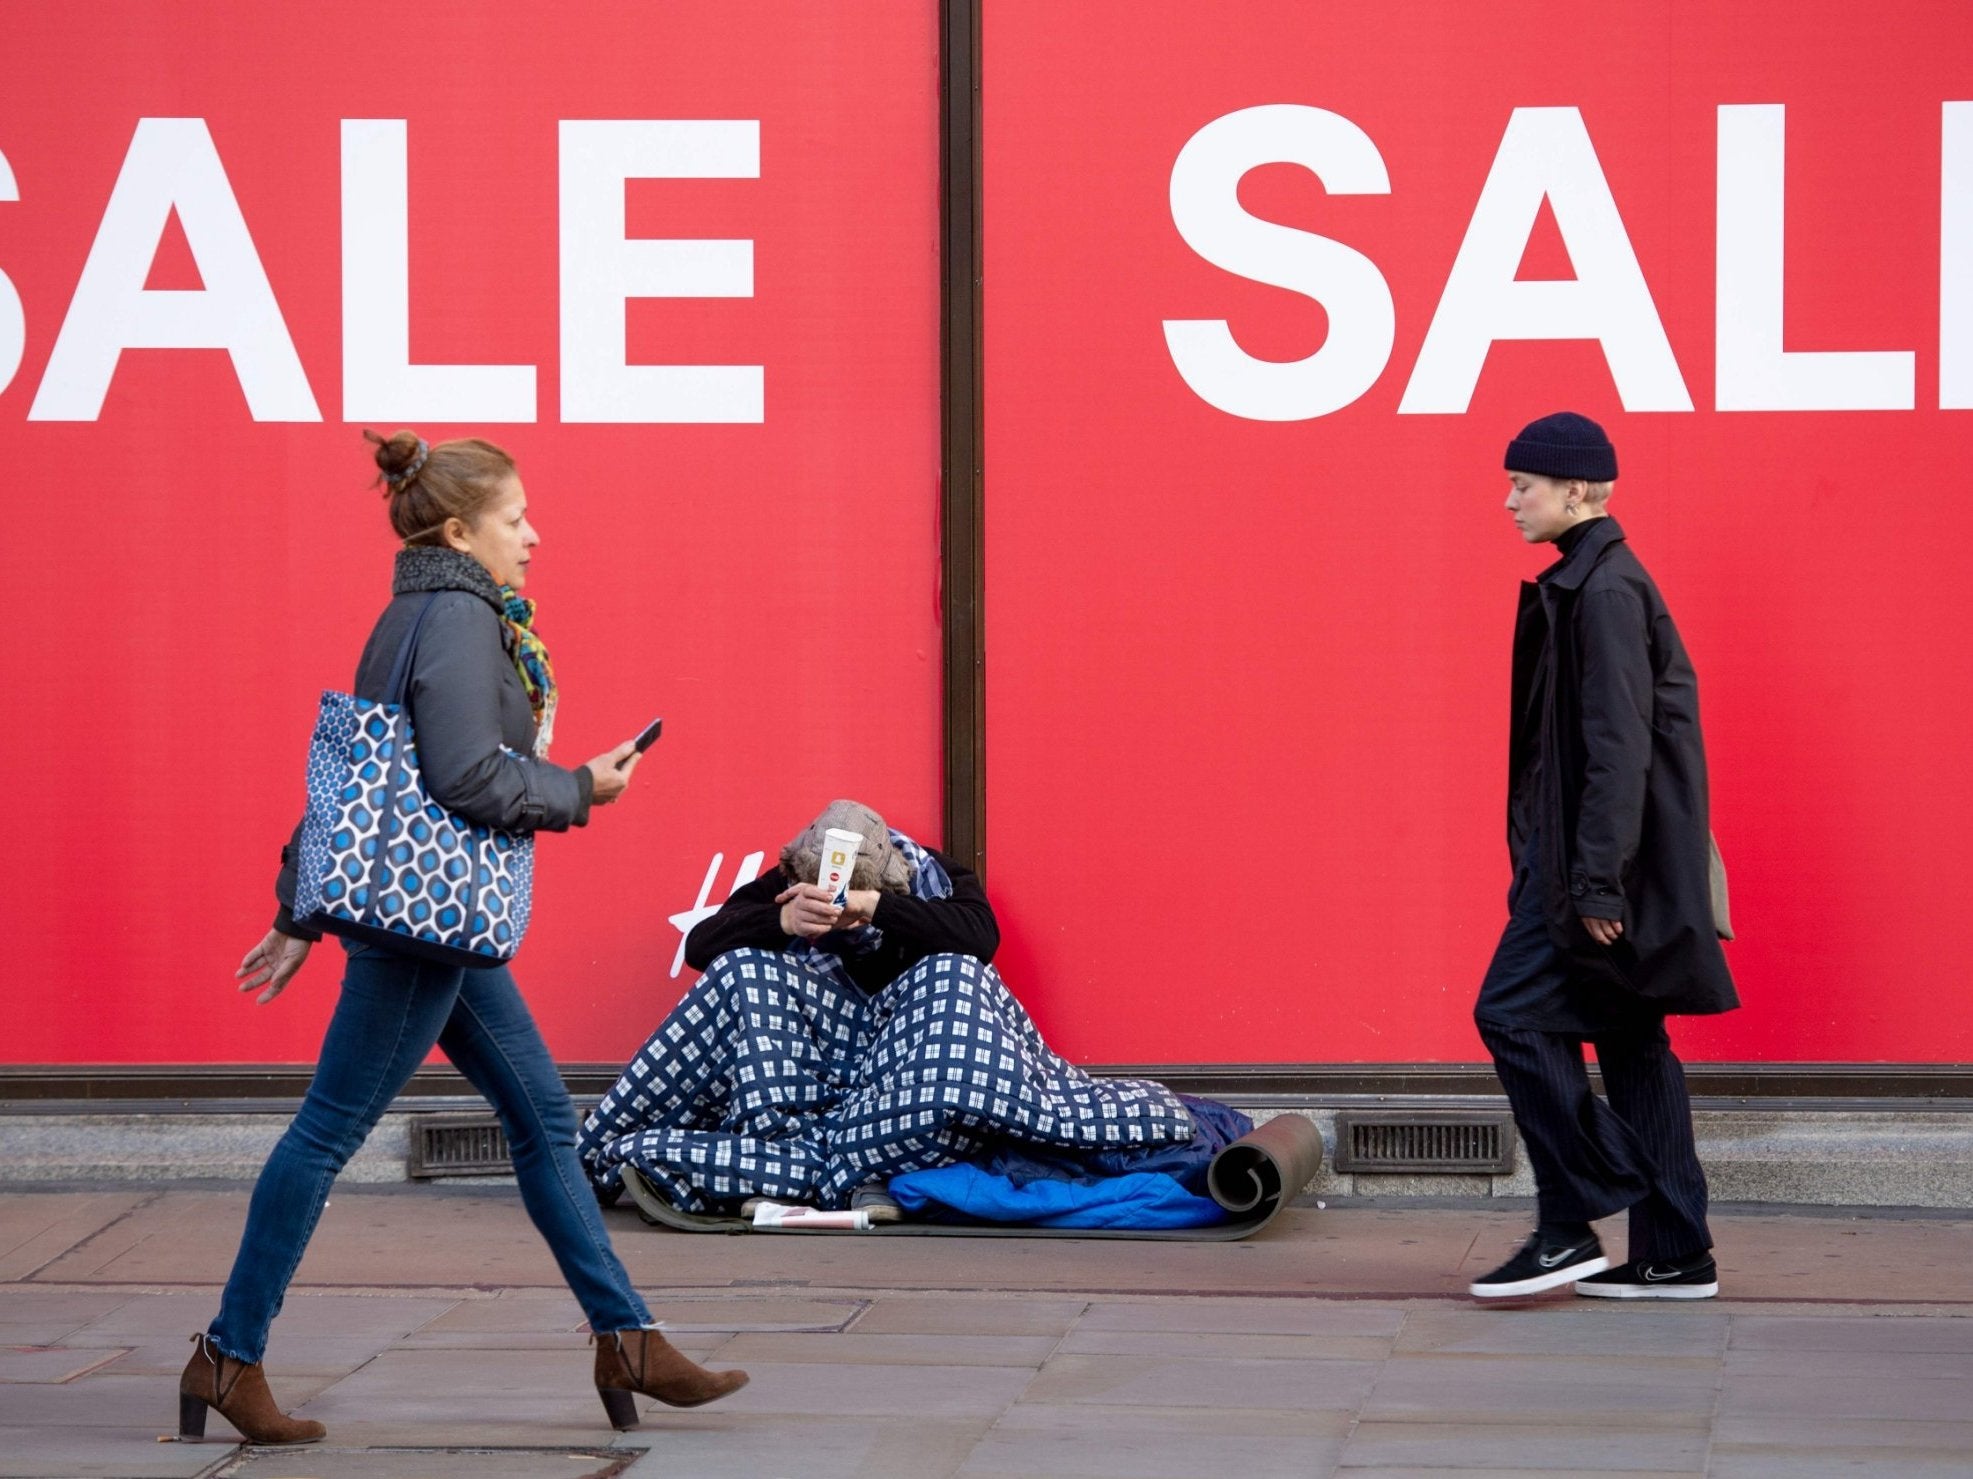 Shoppers walk past a homeless person begging on Oxford Street in central London on 22 December, 2018